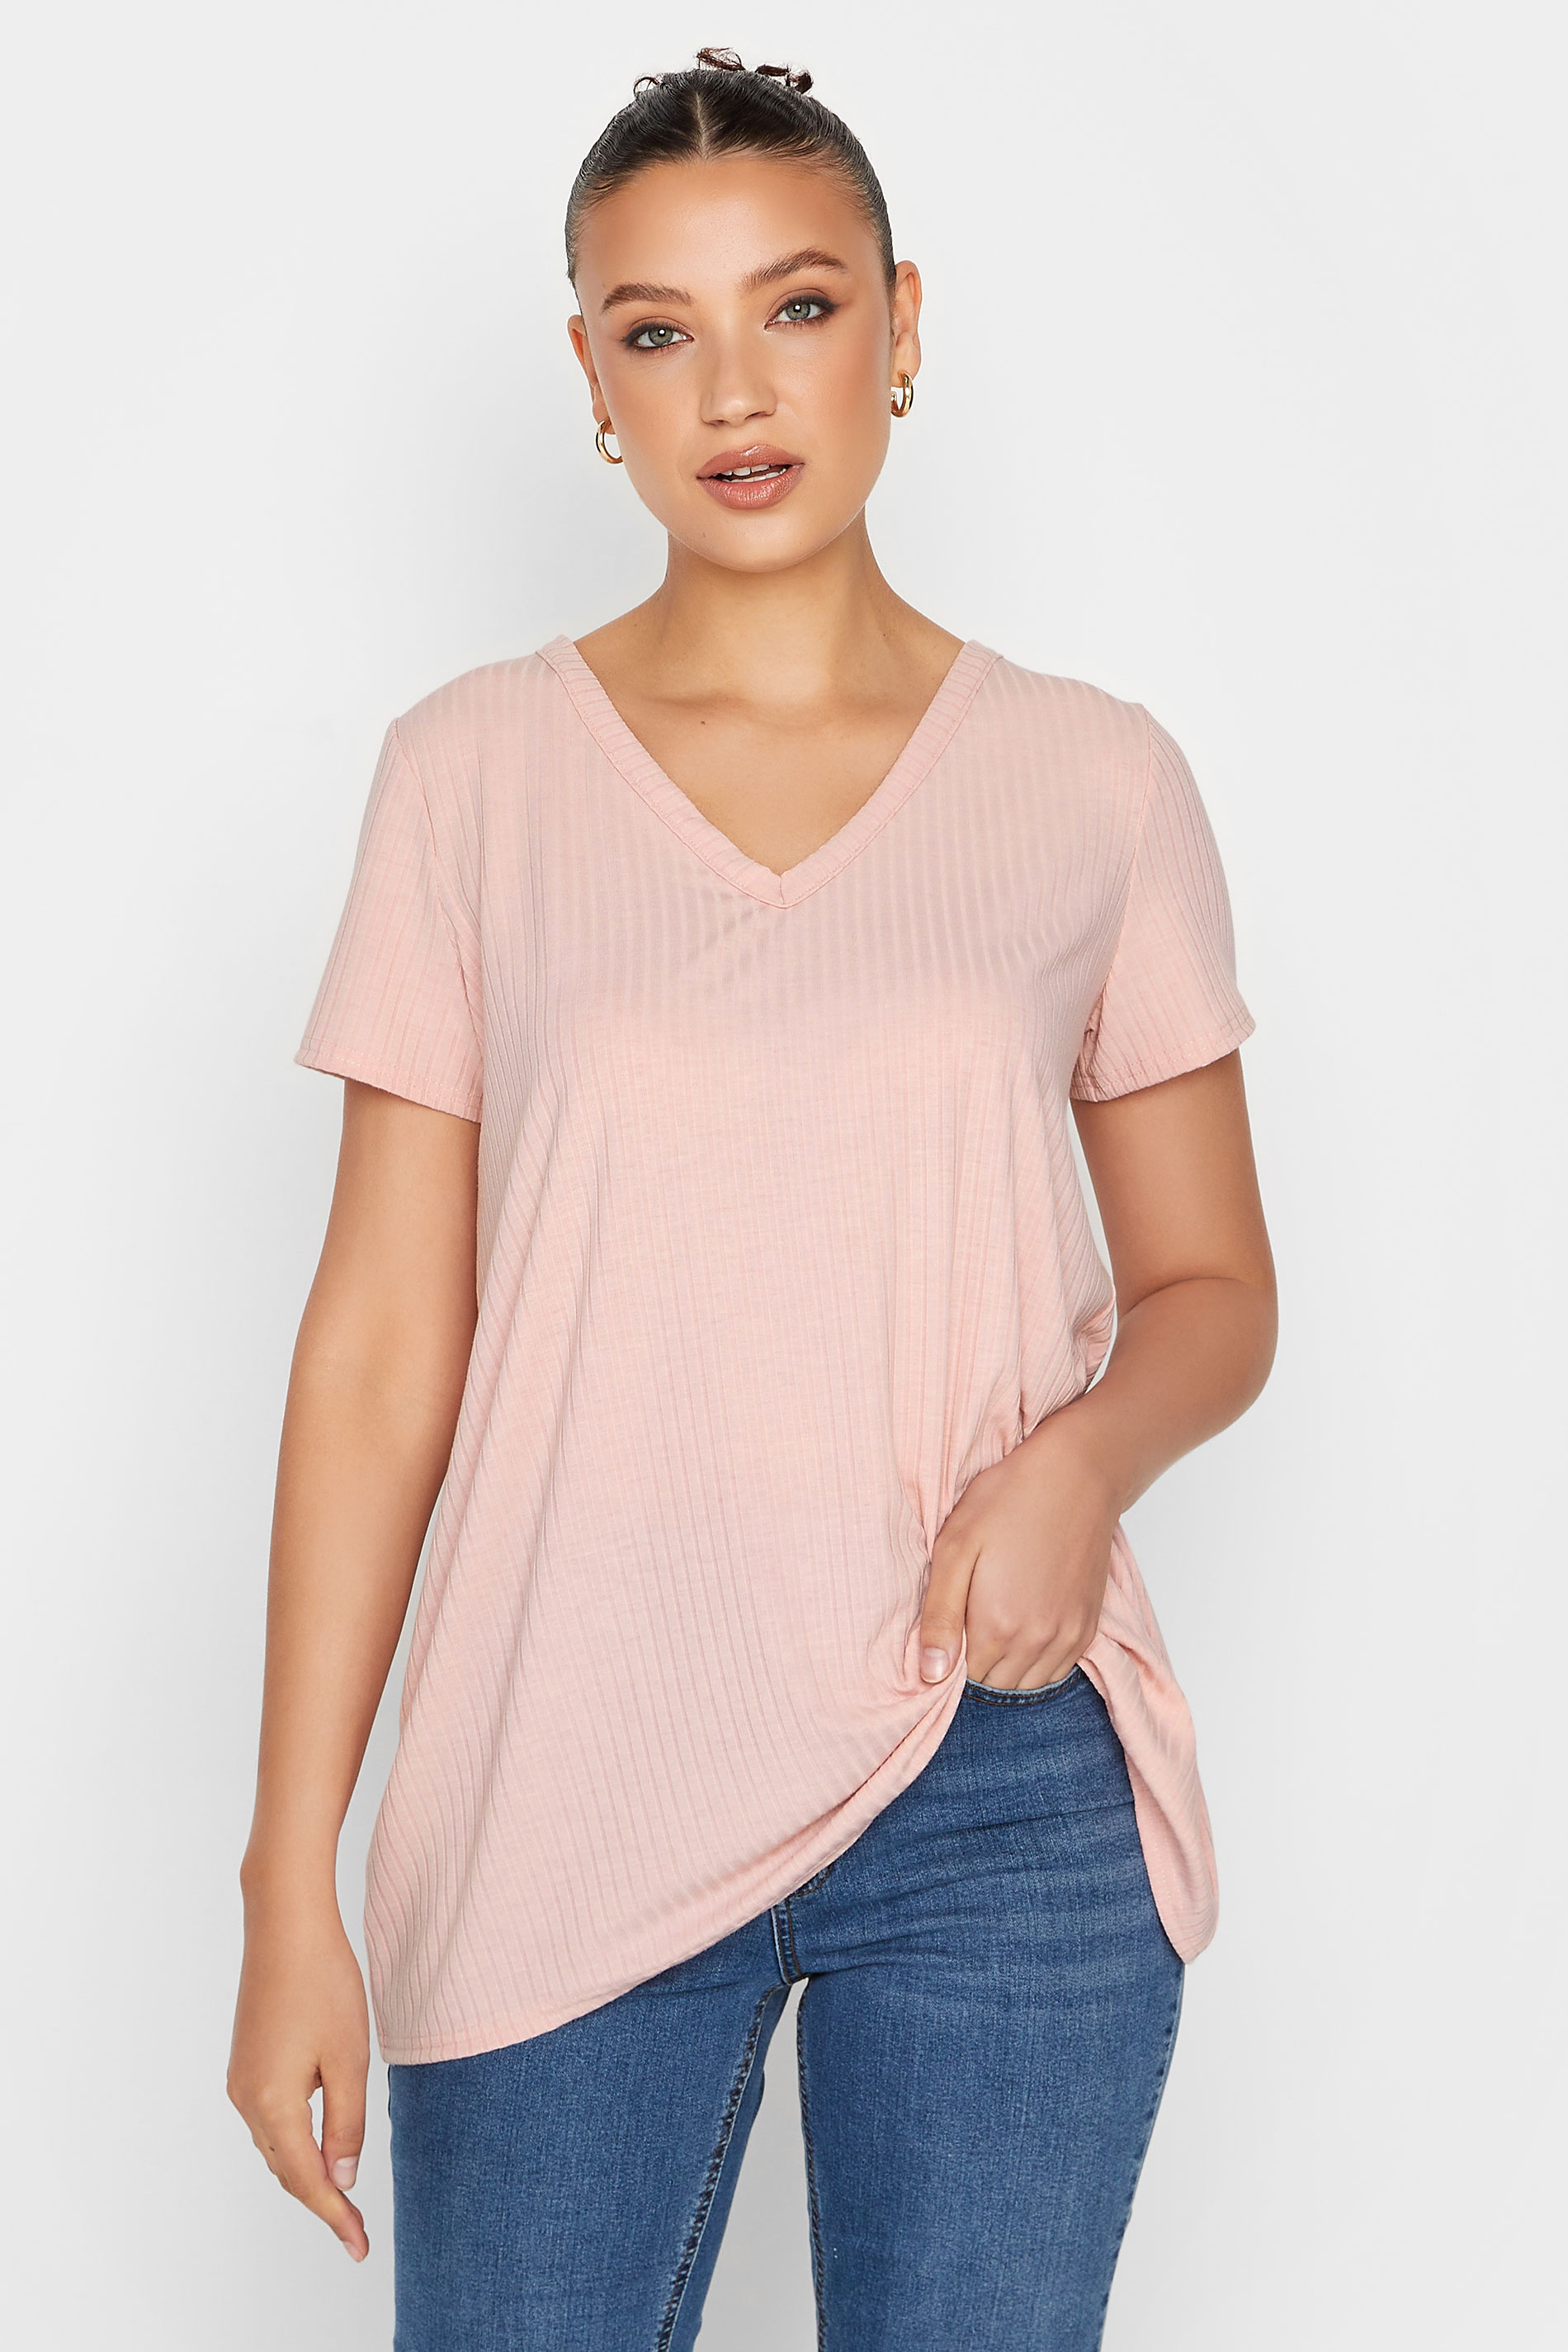 LTS Tall Women's Pink Ribbed V-Neck Swing Top | Long Tall Sally  1